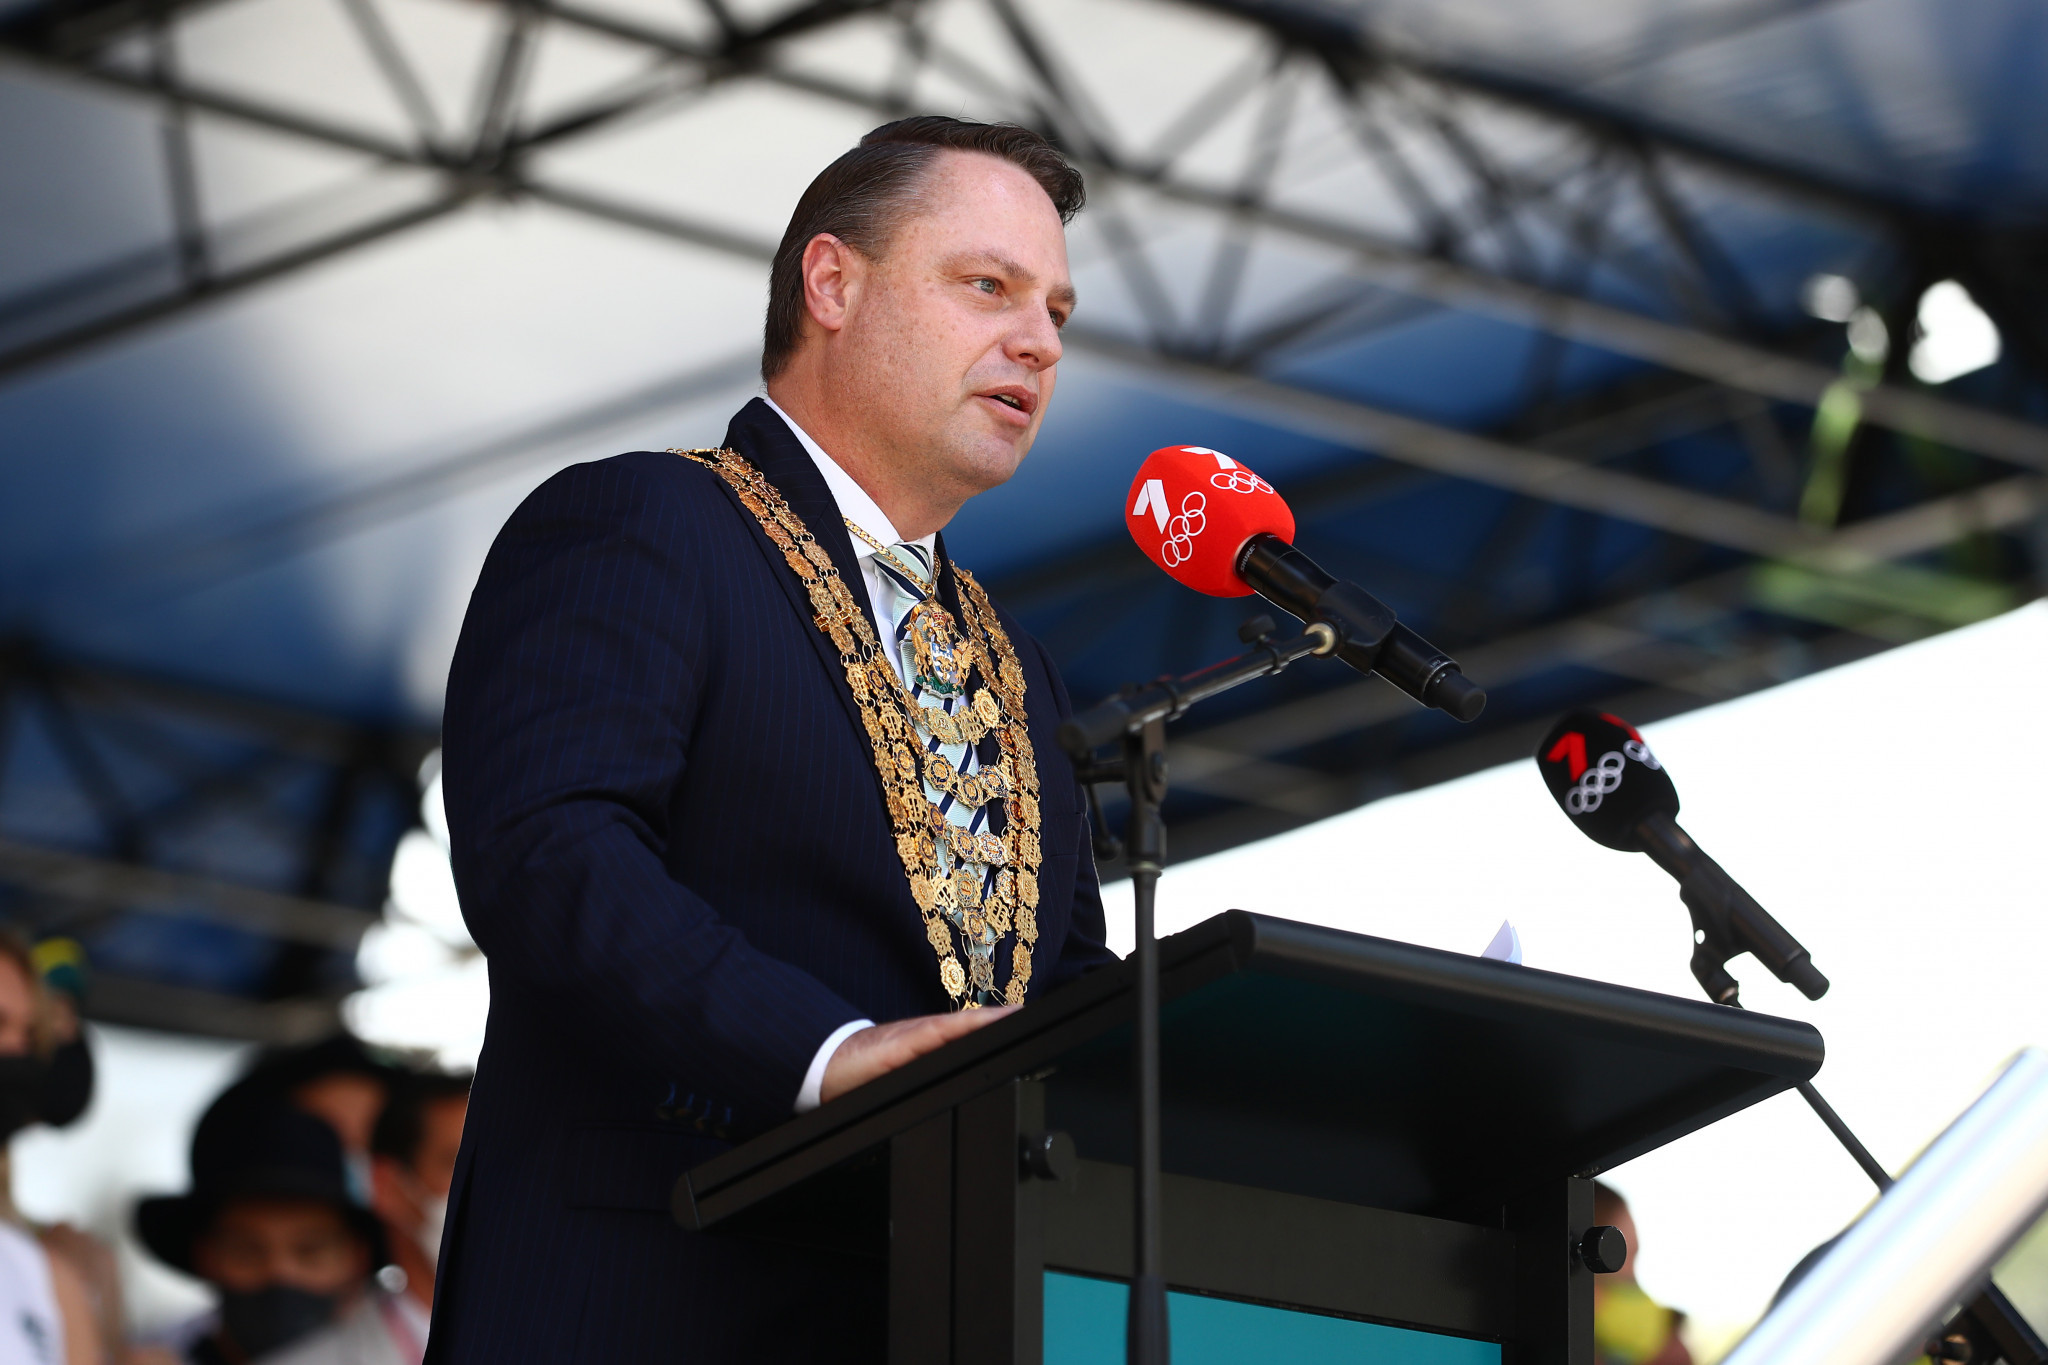 Brisbane Mayor Adrian Schrinner hopes to learn "how other host cities are using their Games to deliver long-term advantages" by leading a delegation to Los Angeles and Vancouver ©Getty Images